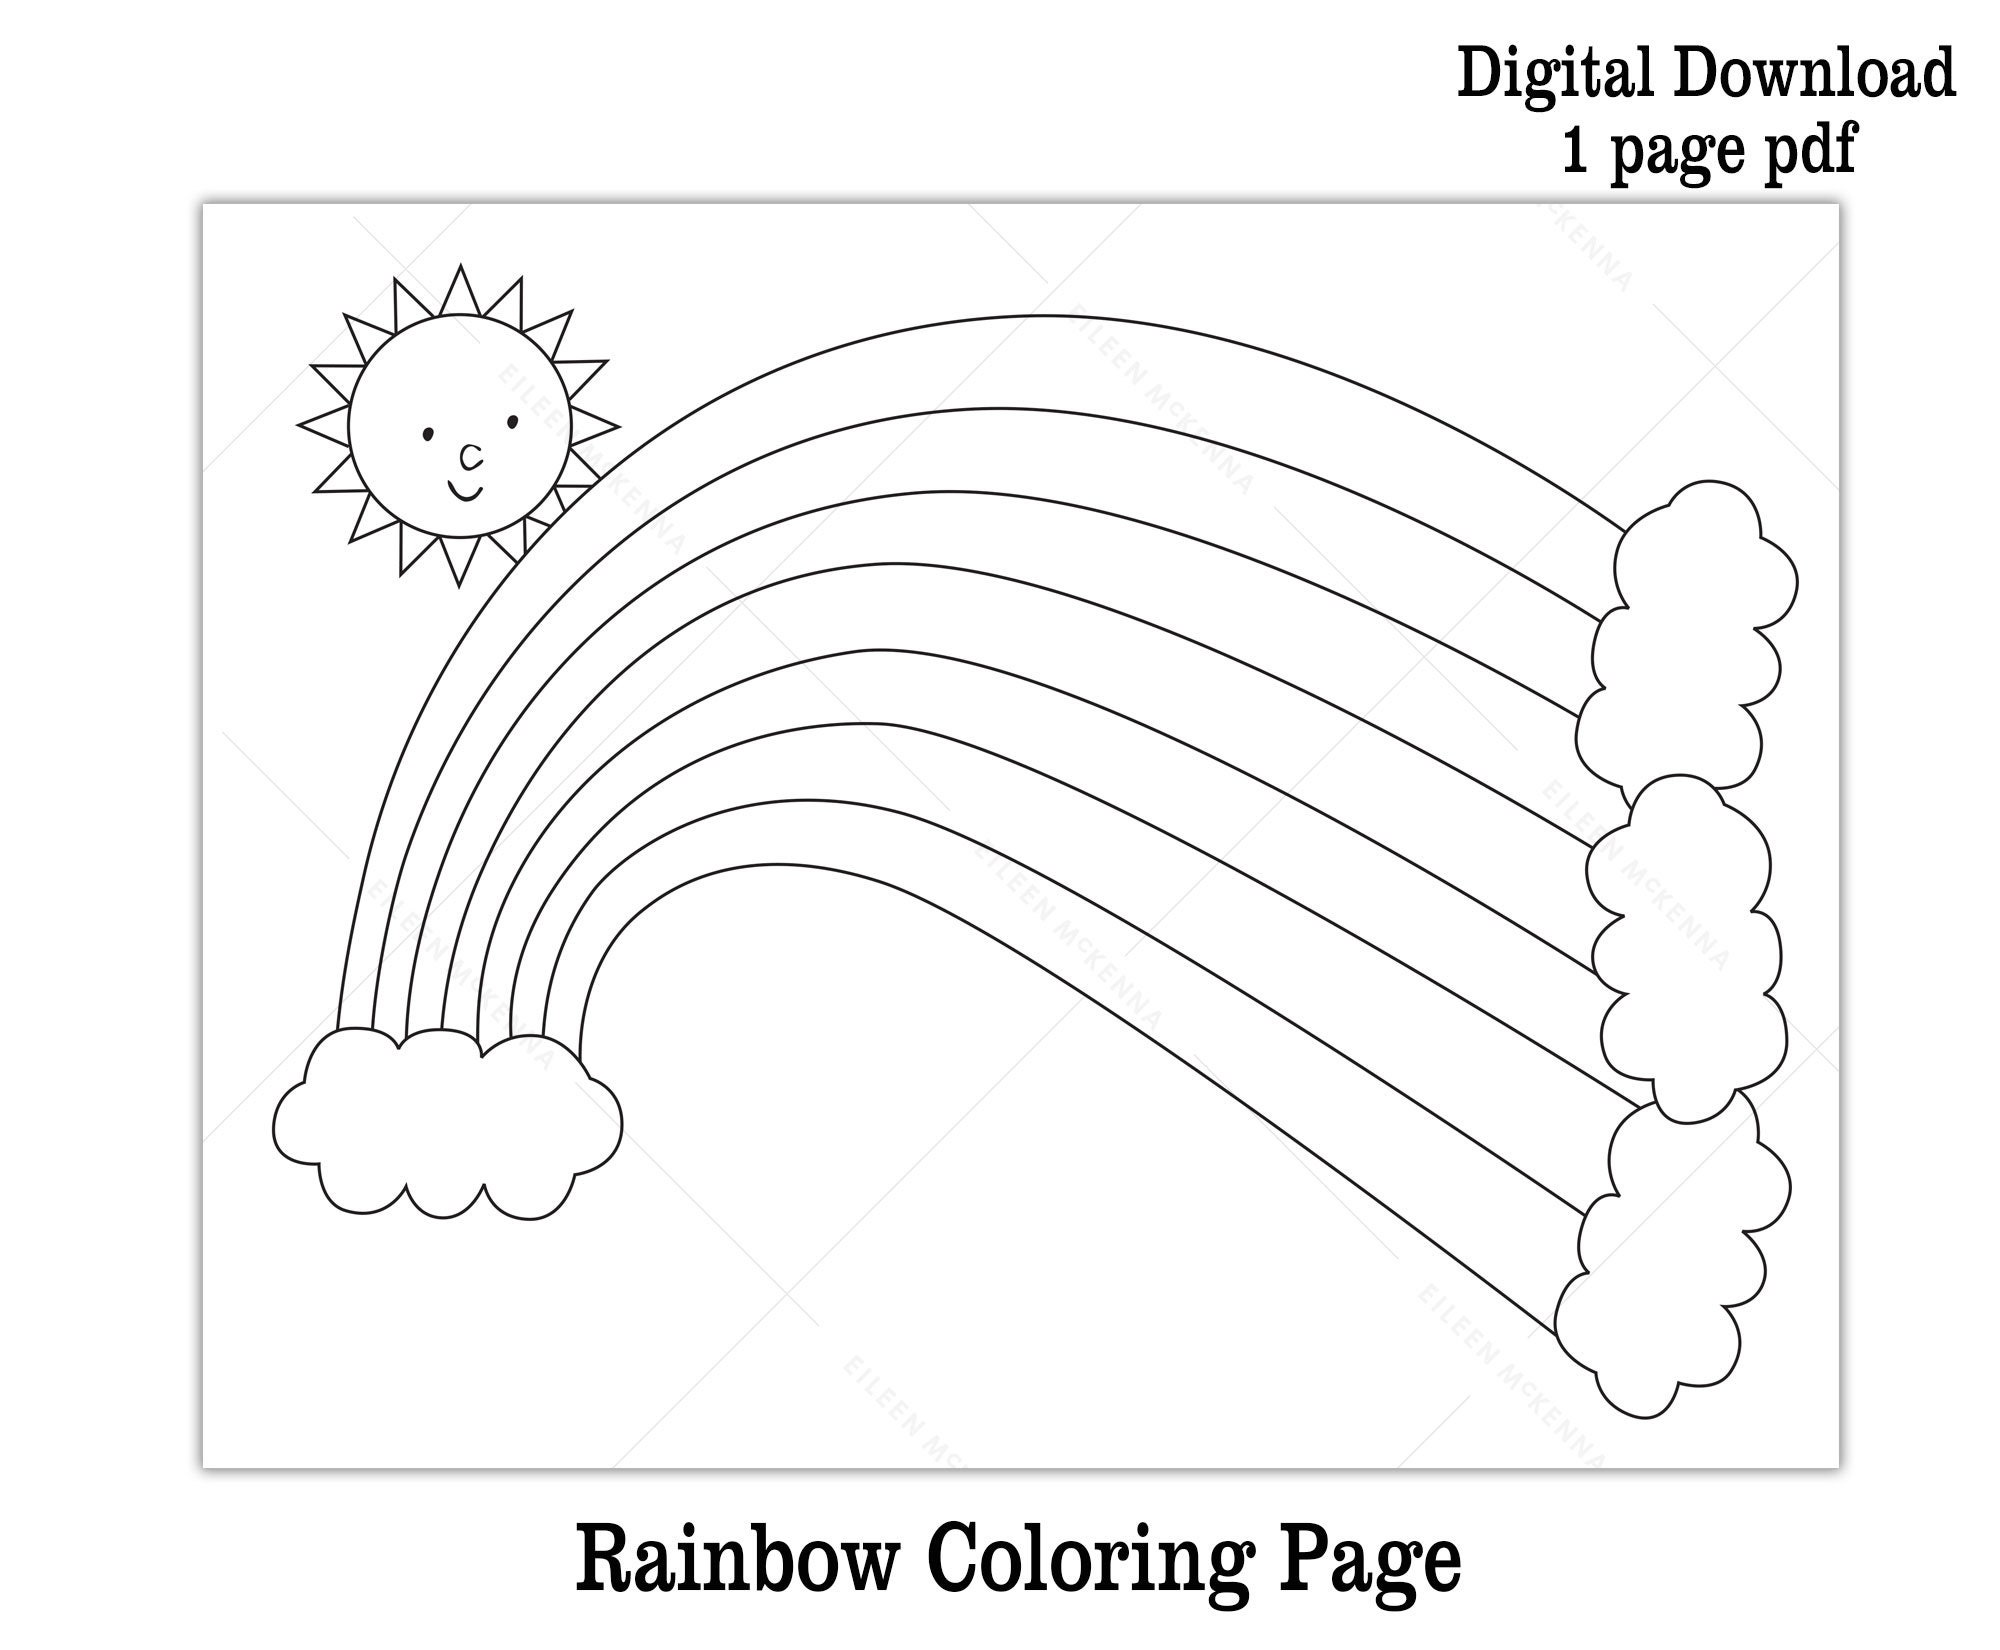 Rainbow coloring page printable rainbow sun kids activity fun self quarantine digital download online learning colors of the rainbow sheet